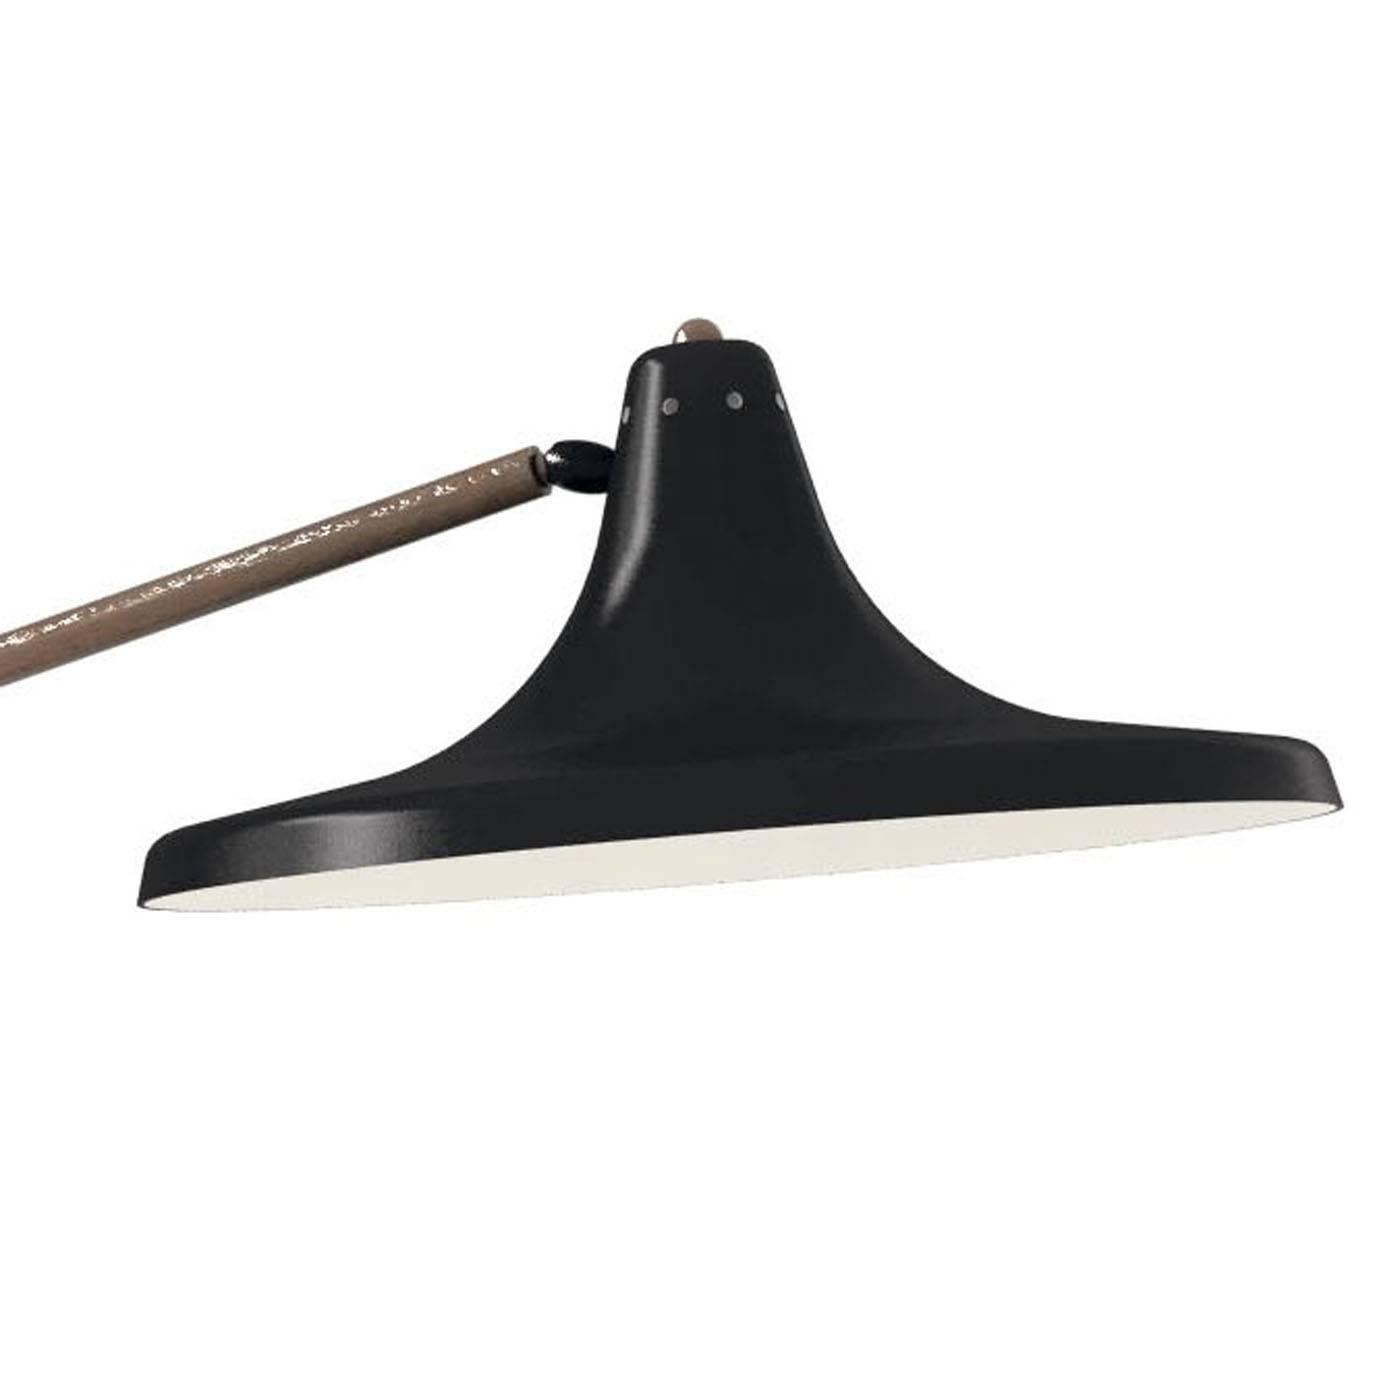 A modern interpretation of the iconic gooseneck lamp, this desk lamp features a round base and shade in metal with a glossy black finish. The shaft, curved to accommodate the large opening of the shade, is in brass with an elegant bronze finish that